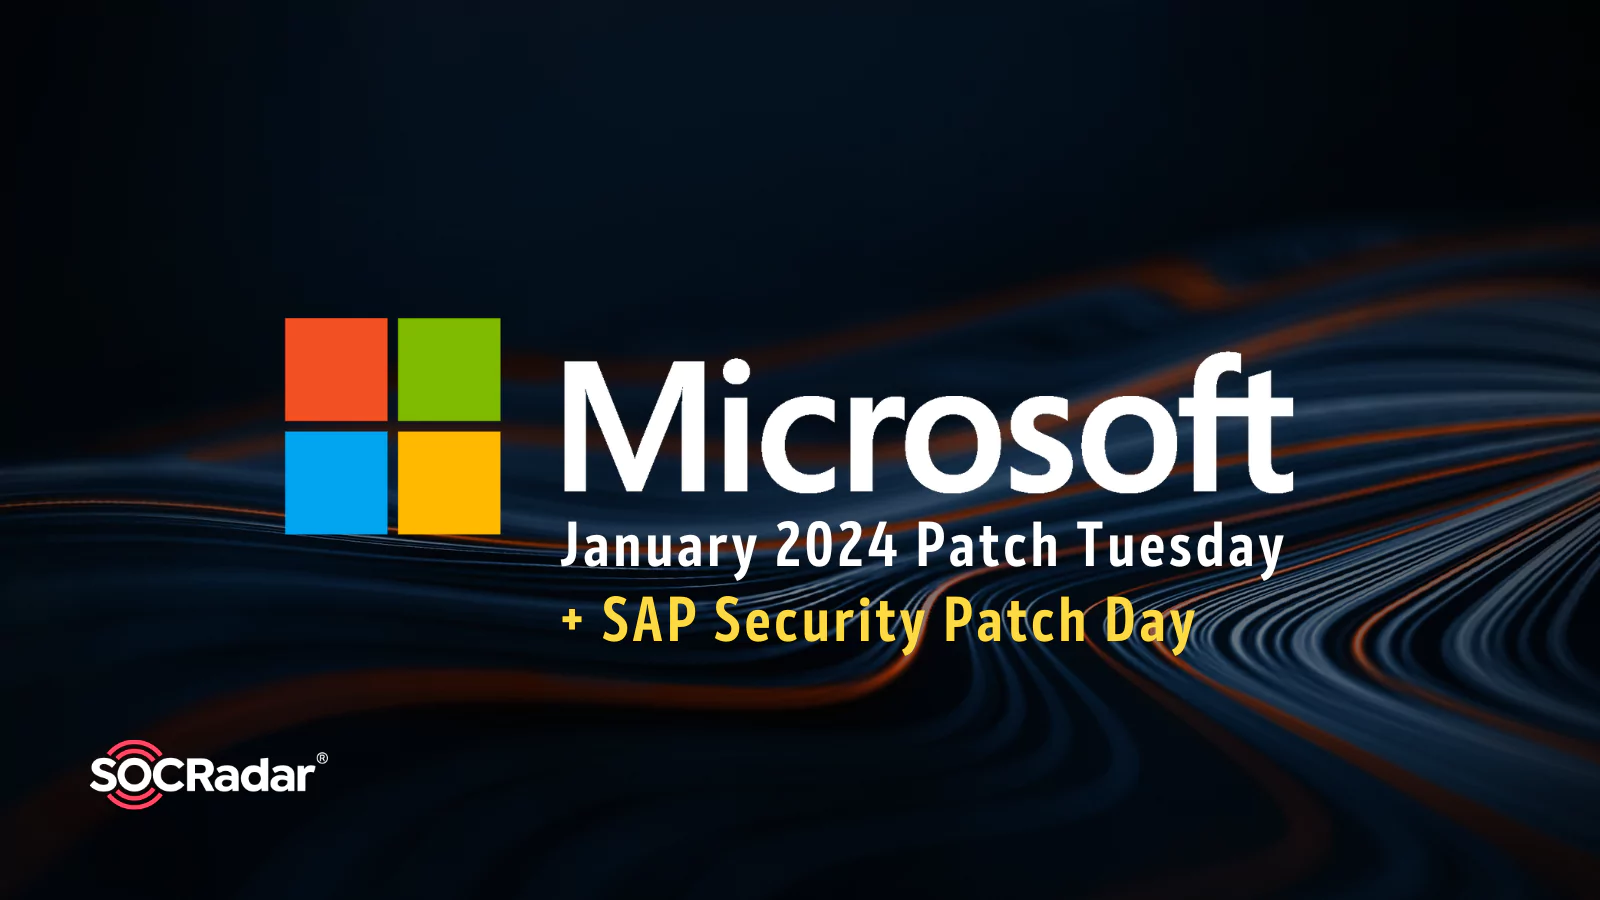 January 2024 Microsoft Patch Tuesday & SAP Security Patch Day